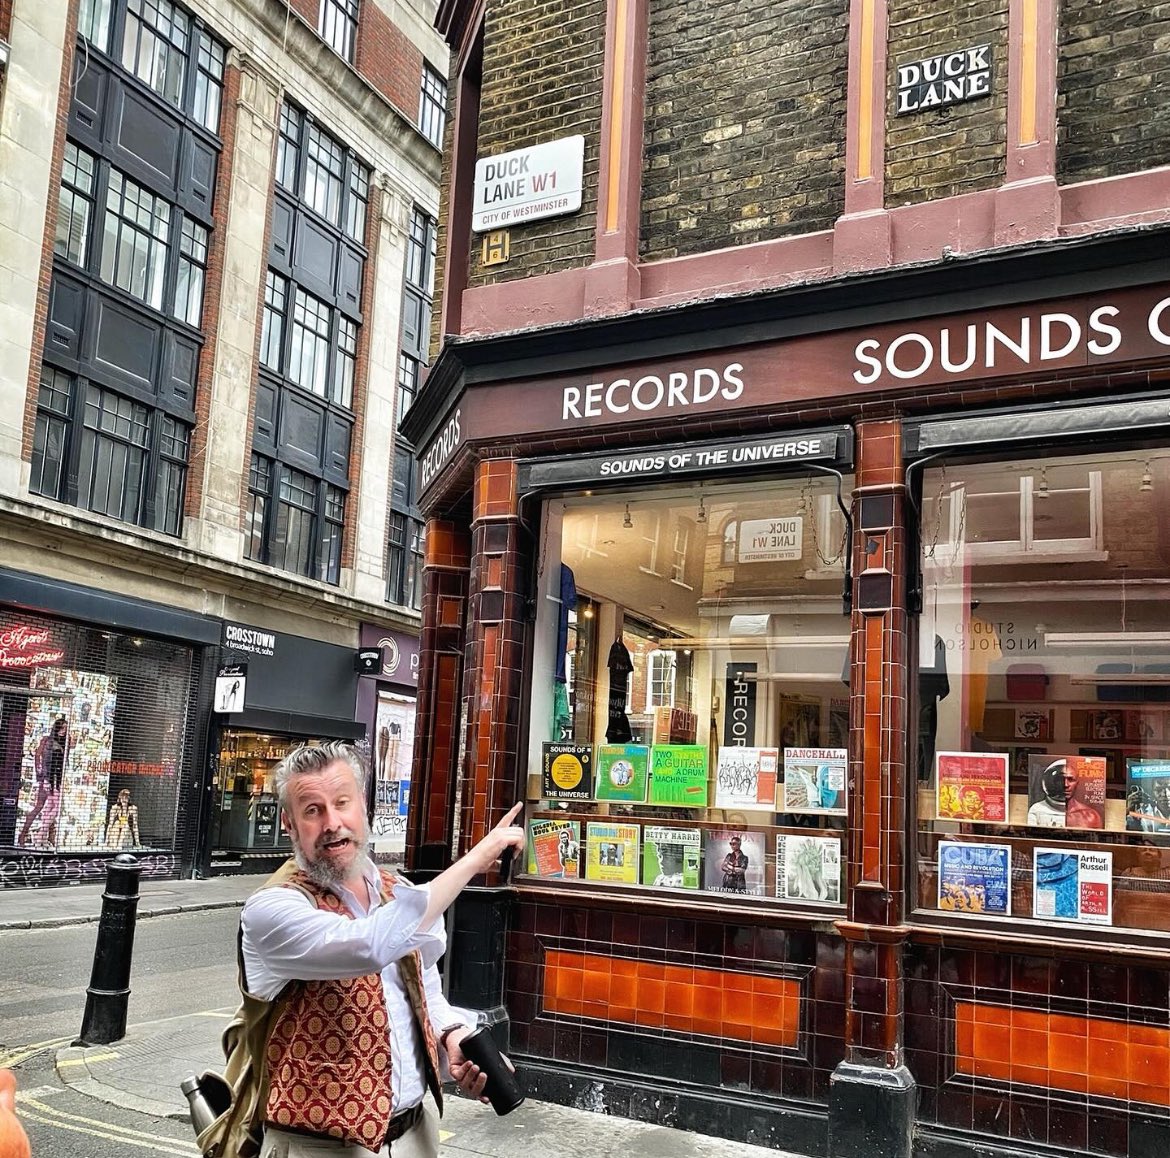 Starting the weekend with a Record Store Crawl walking tour! Give me a wave 👋 if you see us #rsd24 #rsd #tourguidelife #lovelondon